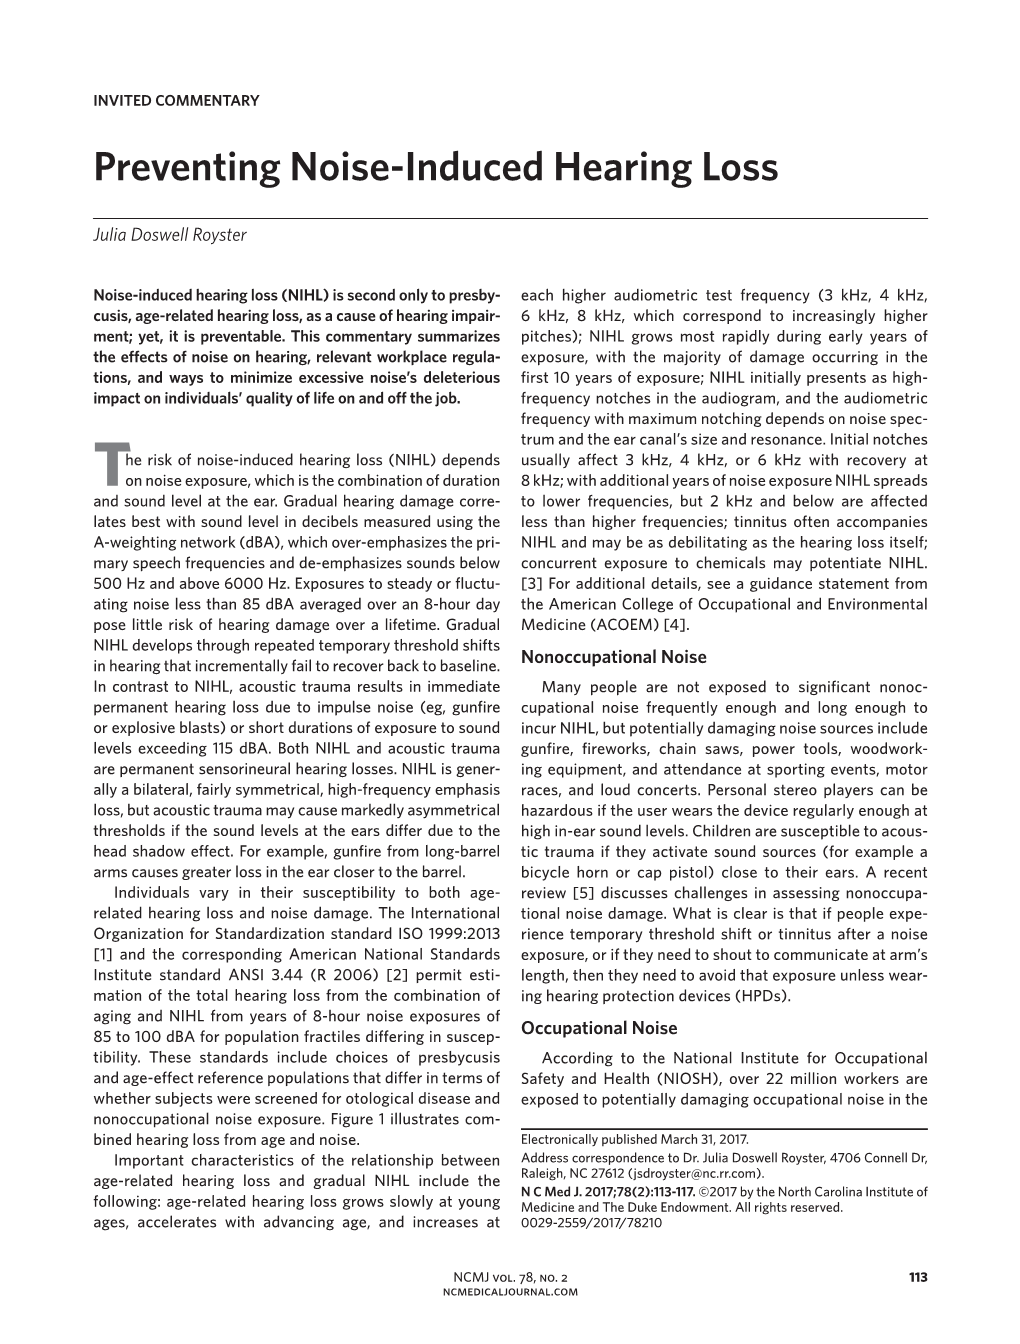 Preventing Noise-Induced Hearing Loss